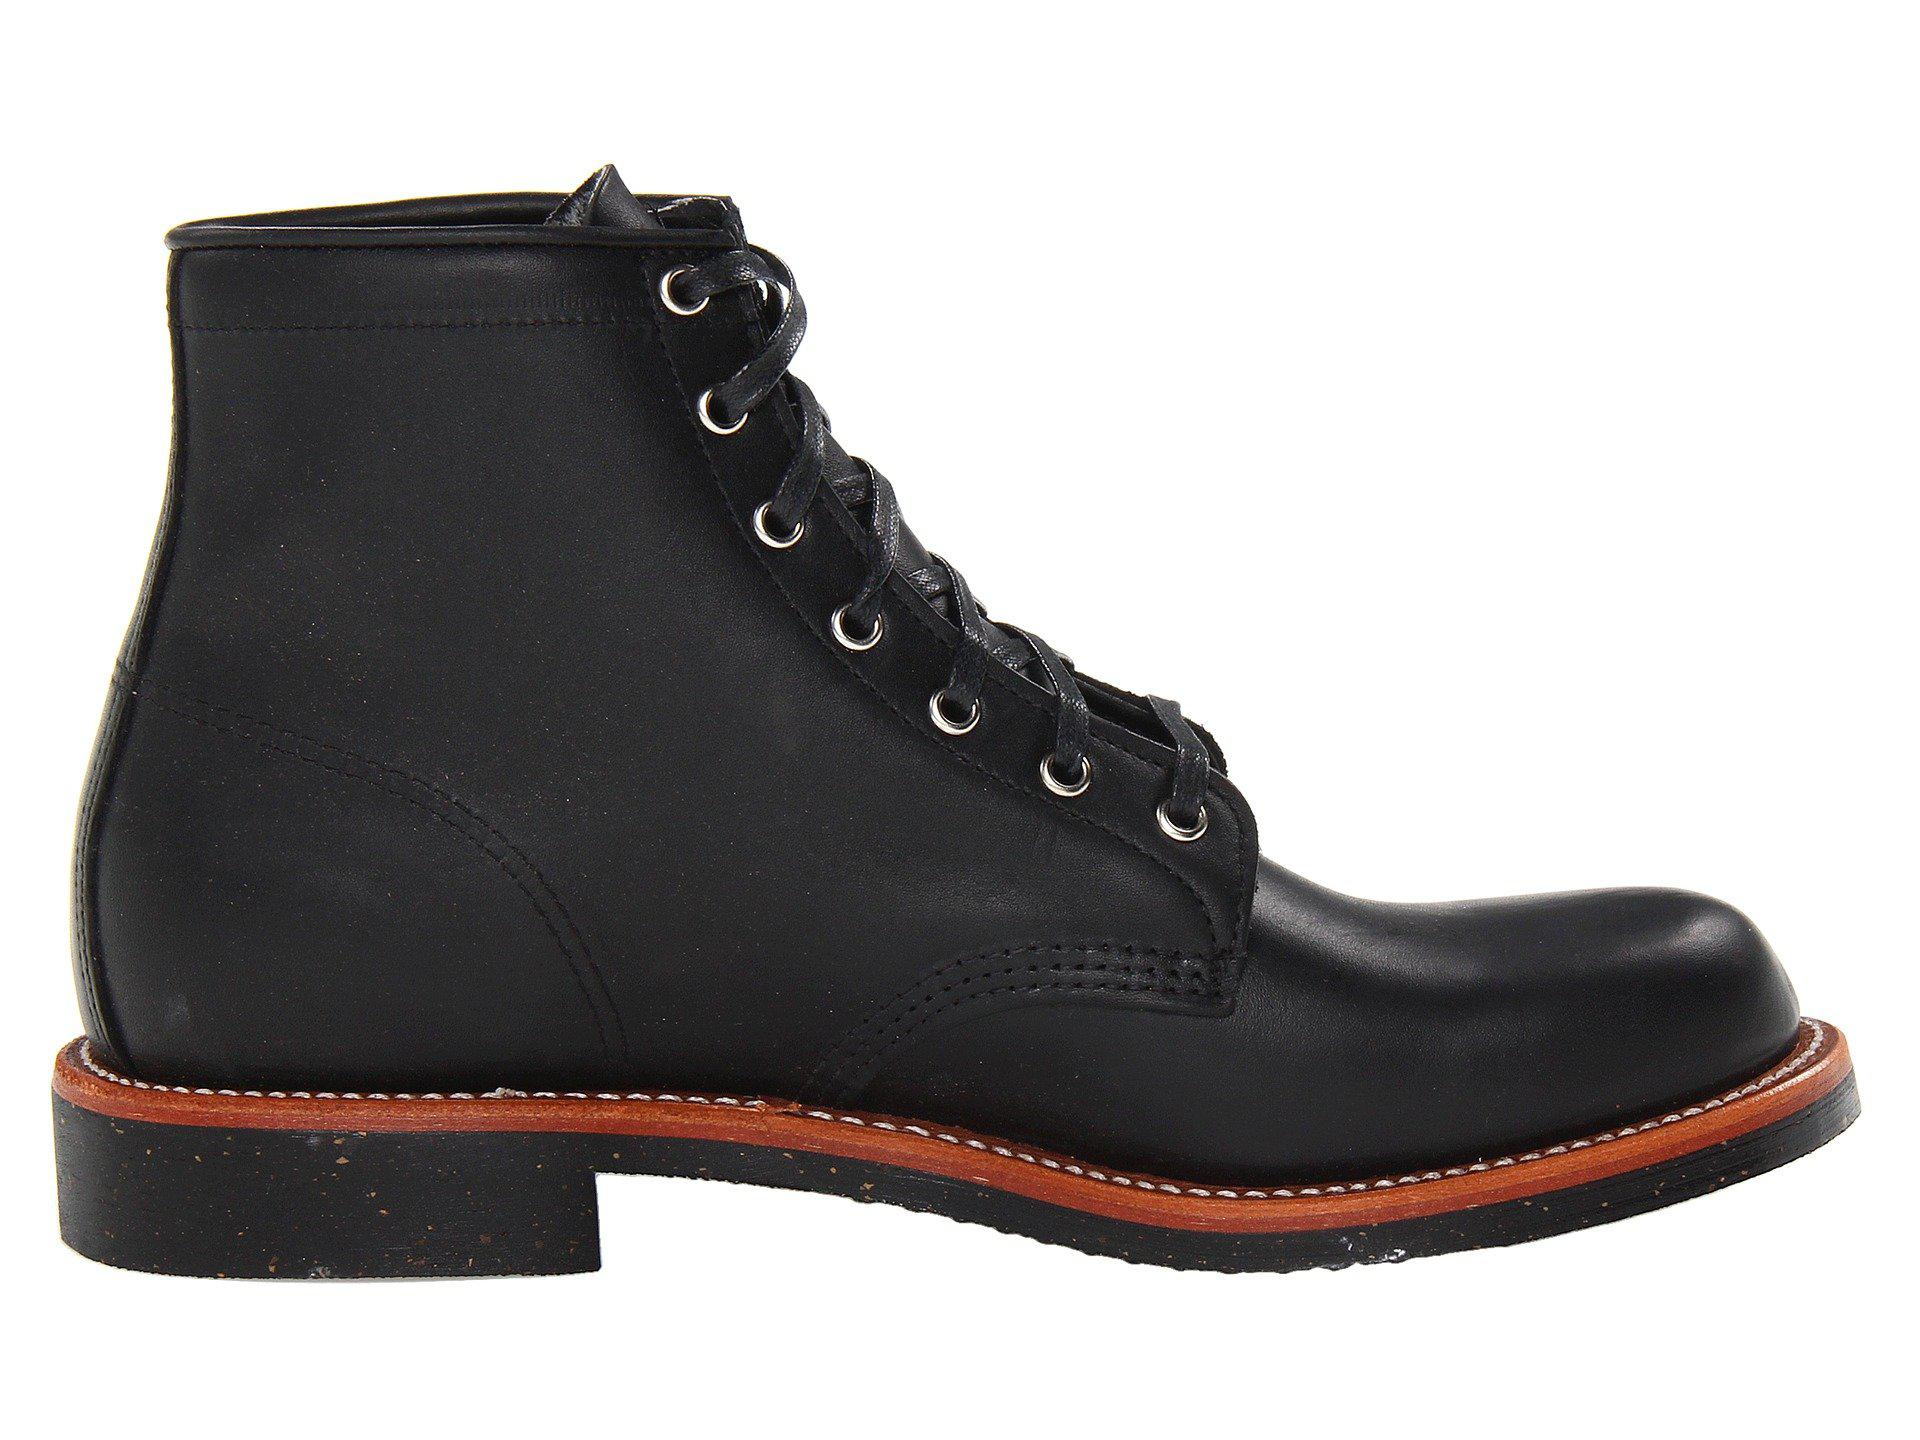 Chippewa Service Boot in Black for Men - Lyst